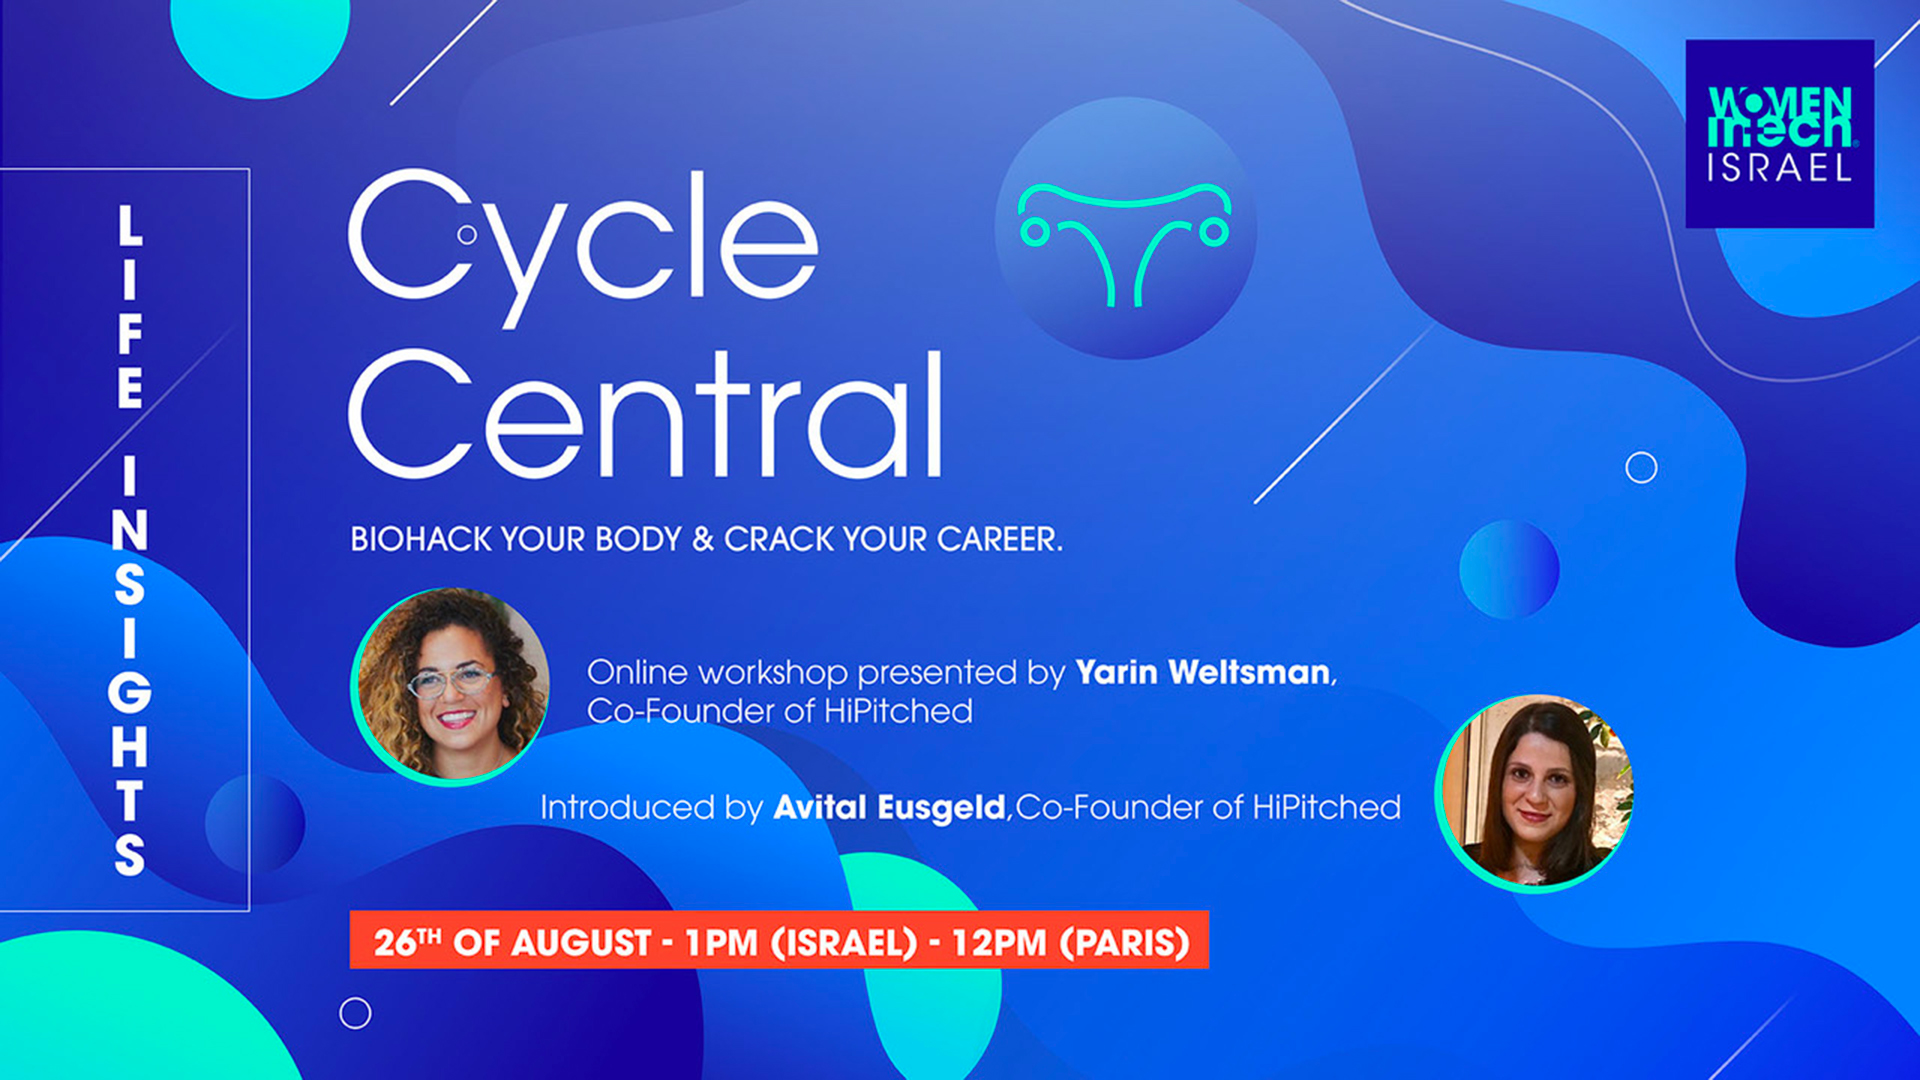 Cycle Central – Biohack Your Body & Crack Your Career